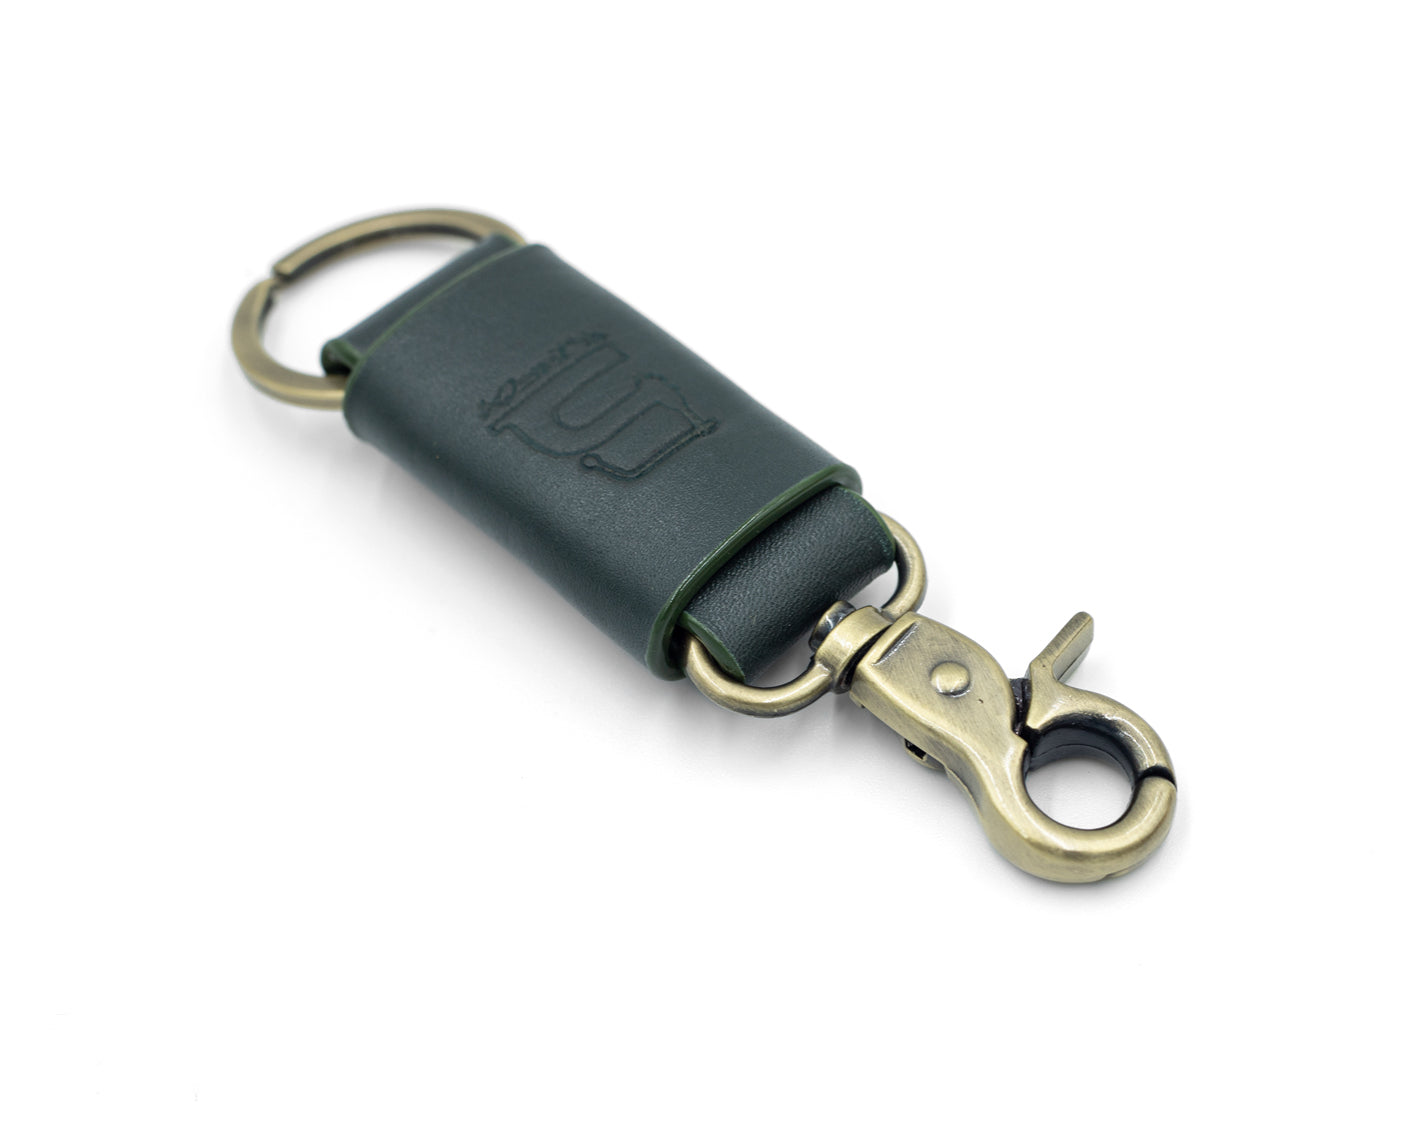 Army Green set (Compact Zipper Wallet - Army Green + Leather Key Loop - Army Green)